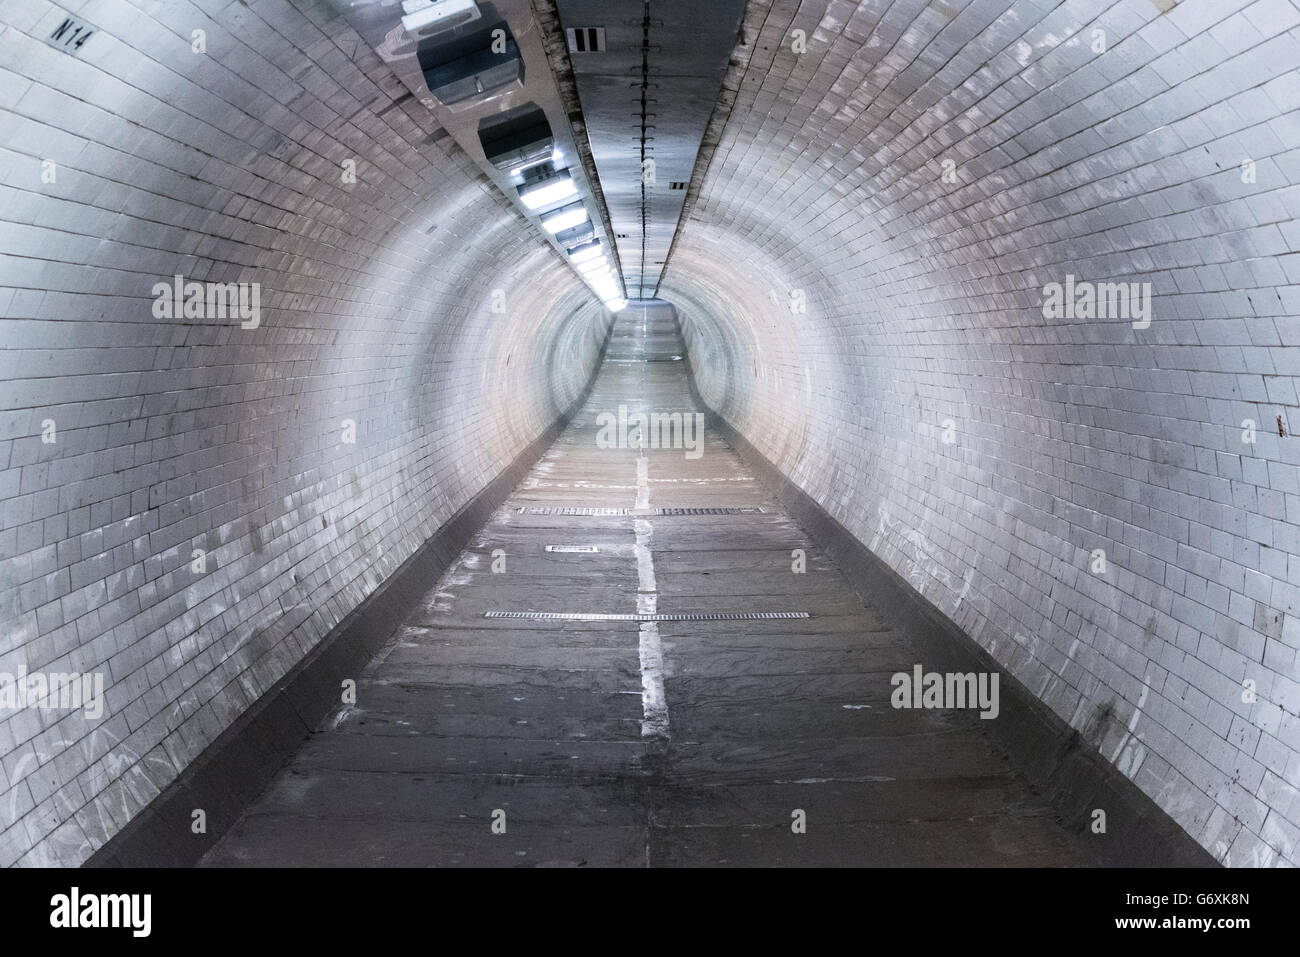 Greenwich foot tunnel under the River Thames in London, United Kingdom Stock Photo